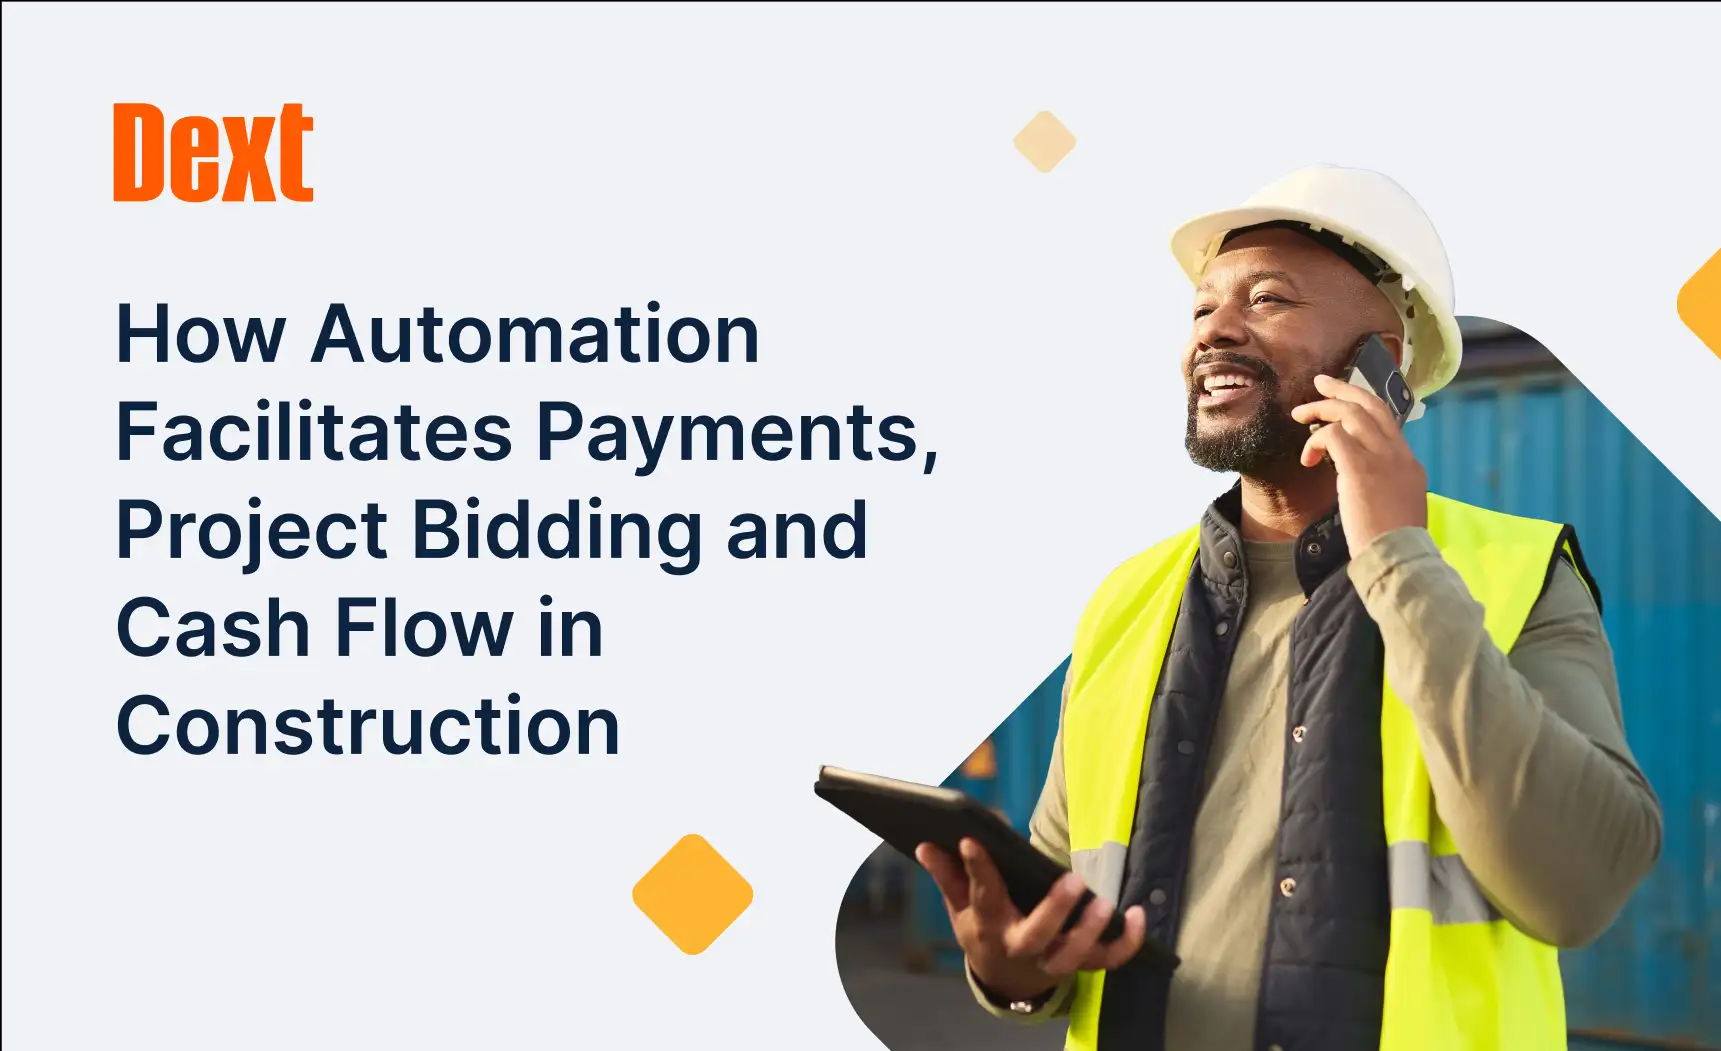 Dext: How Automation Facilitates Payments, Project Bidding and Cash Flow in Construction logo